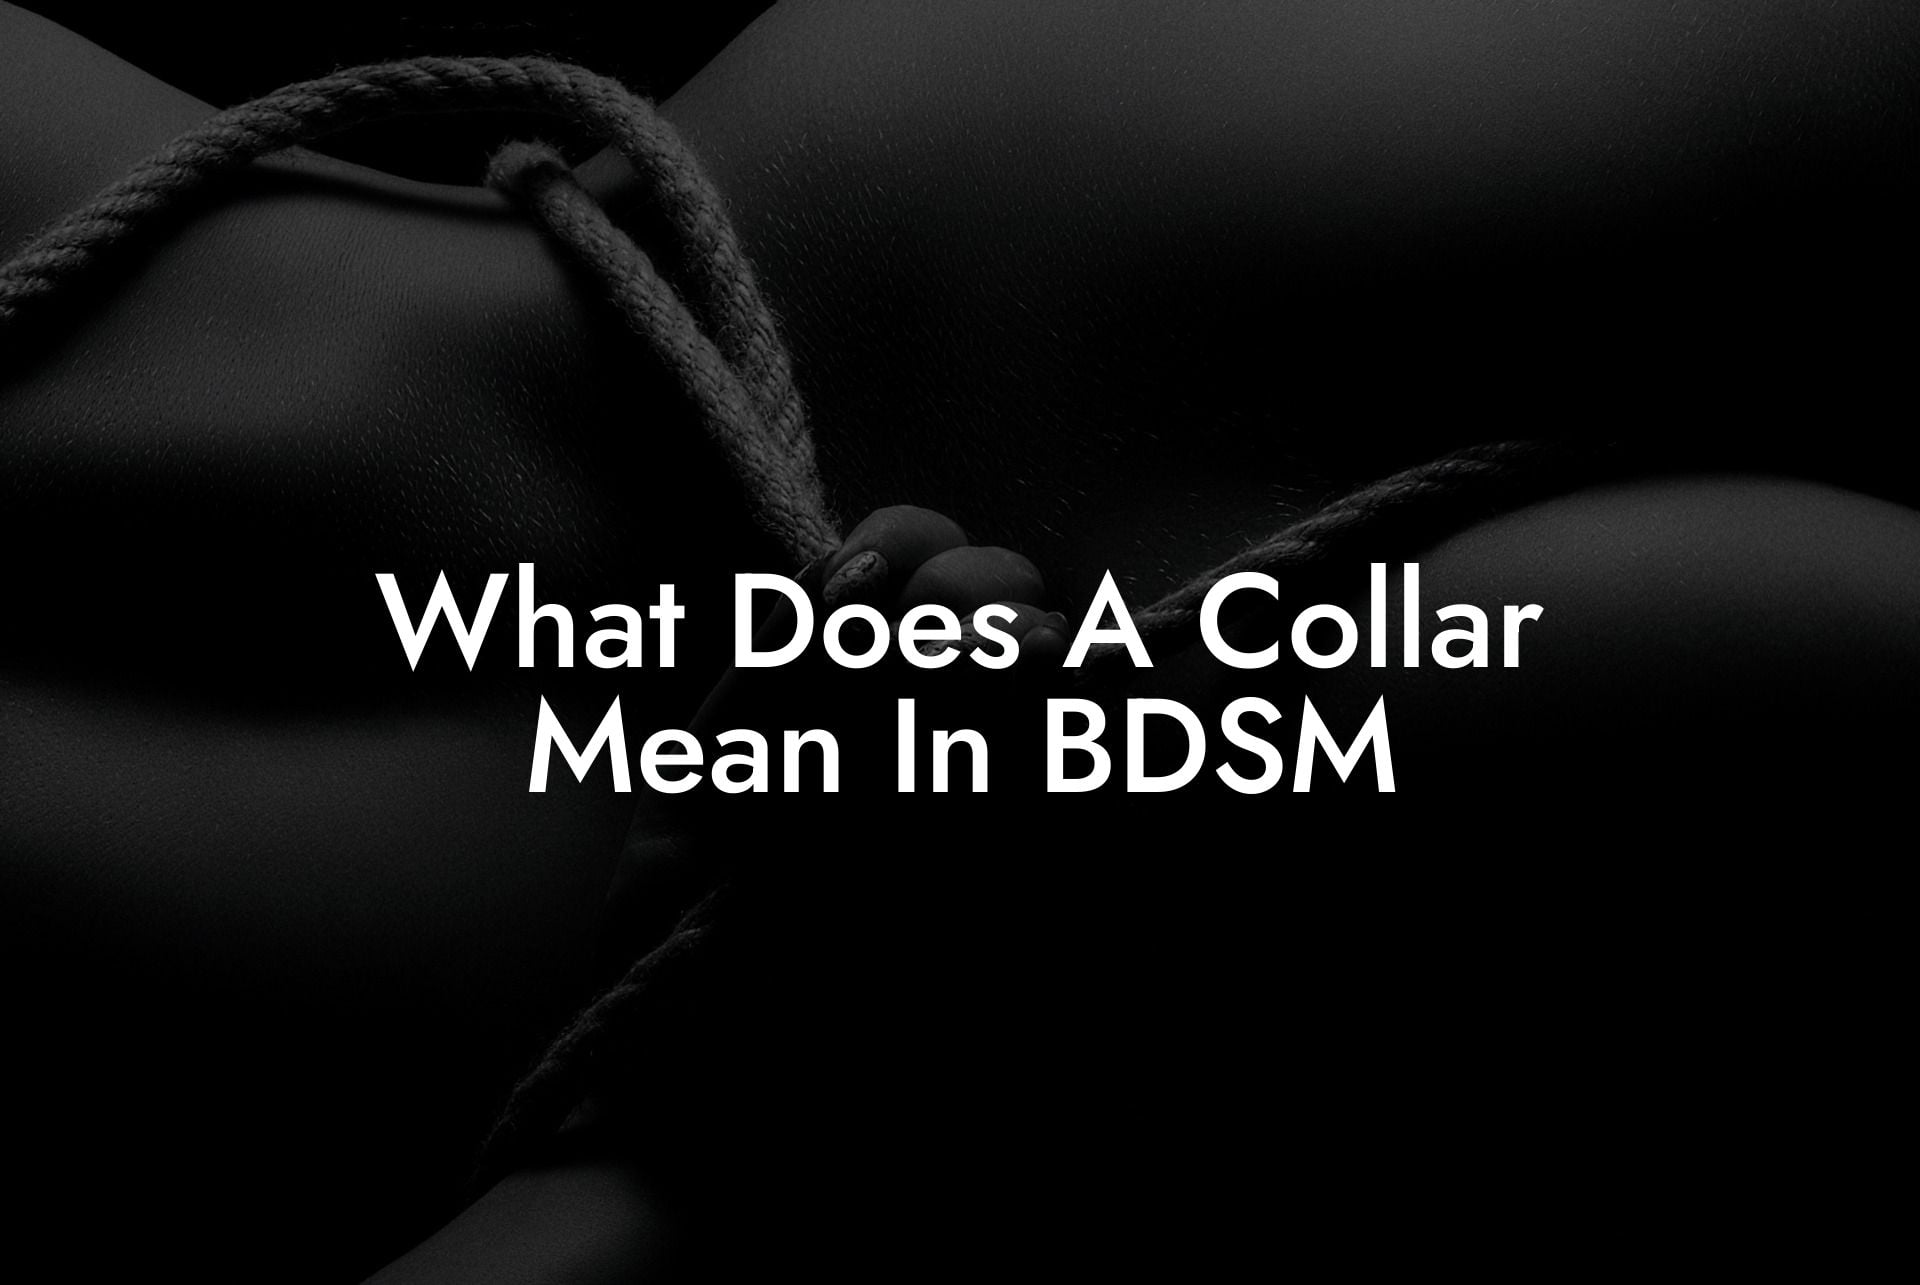 What Does A Collar Mean In BDSM